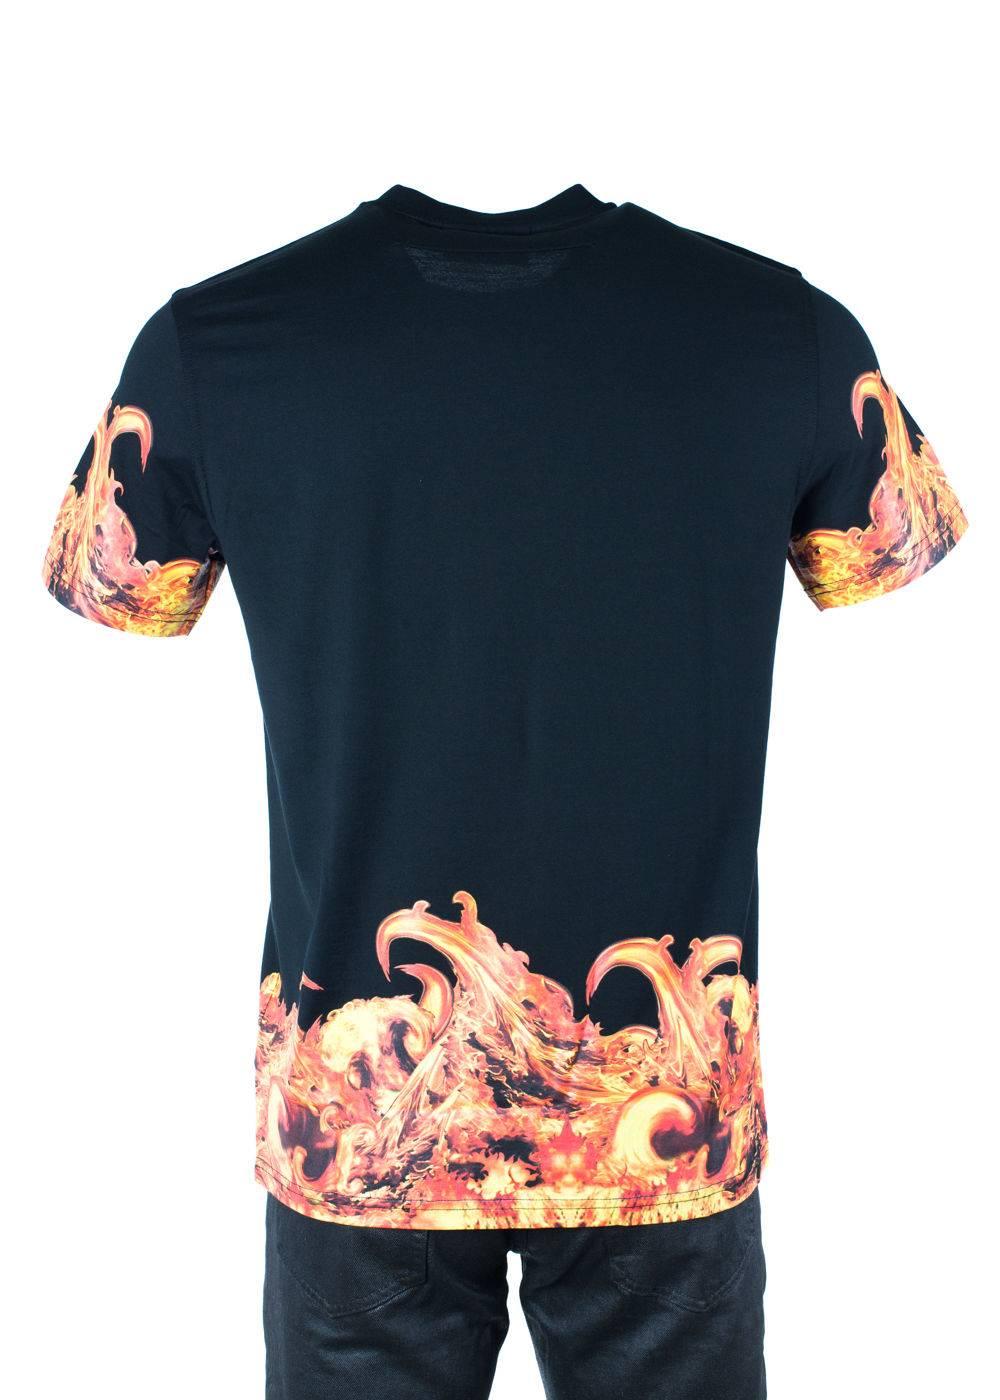 Givenchy Men's 100% Cotton Black Flames Graphic T-Shirt  In New Condition For Sale In Brooklyn, NY